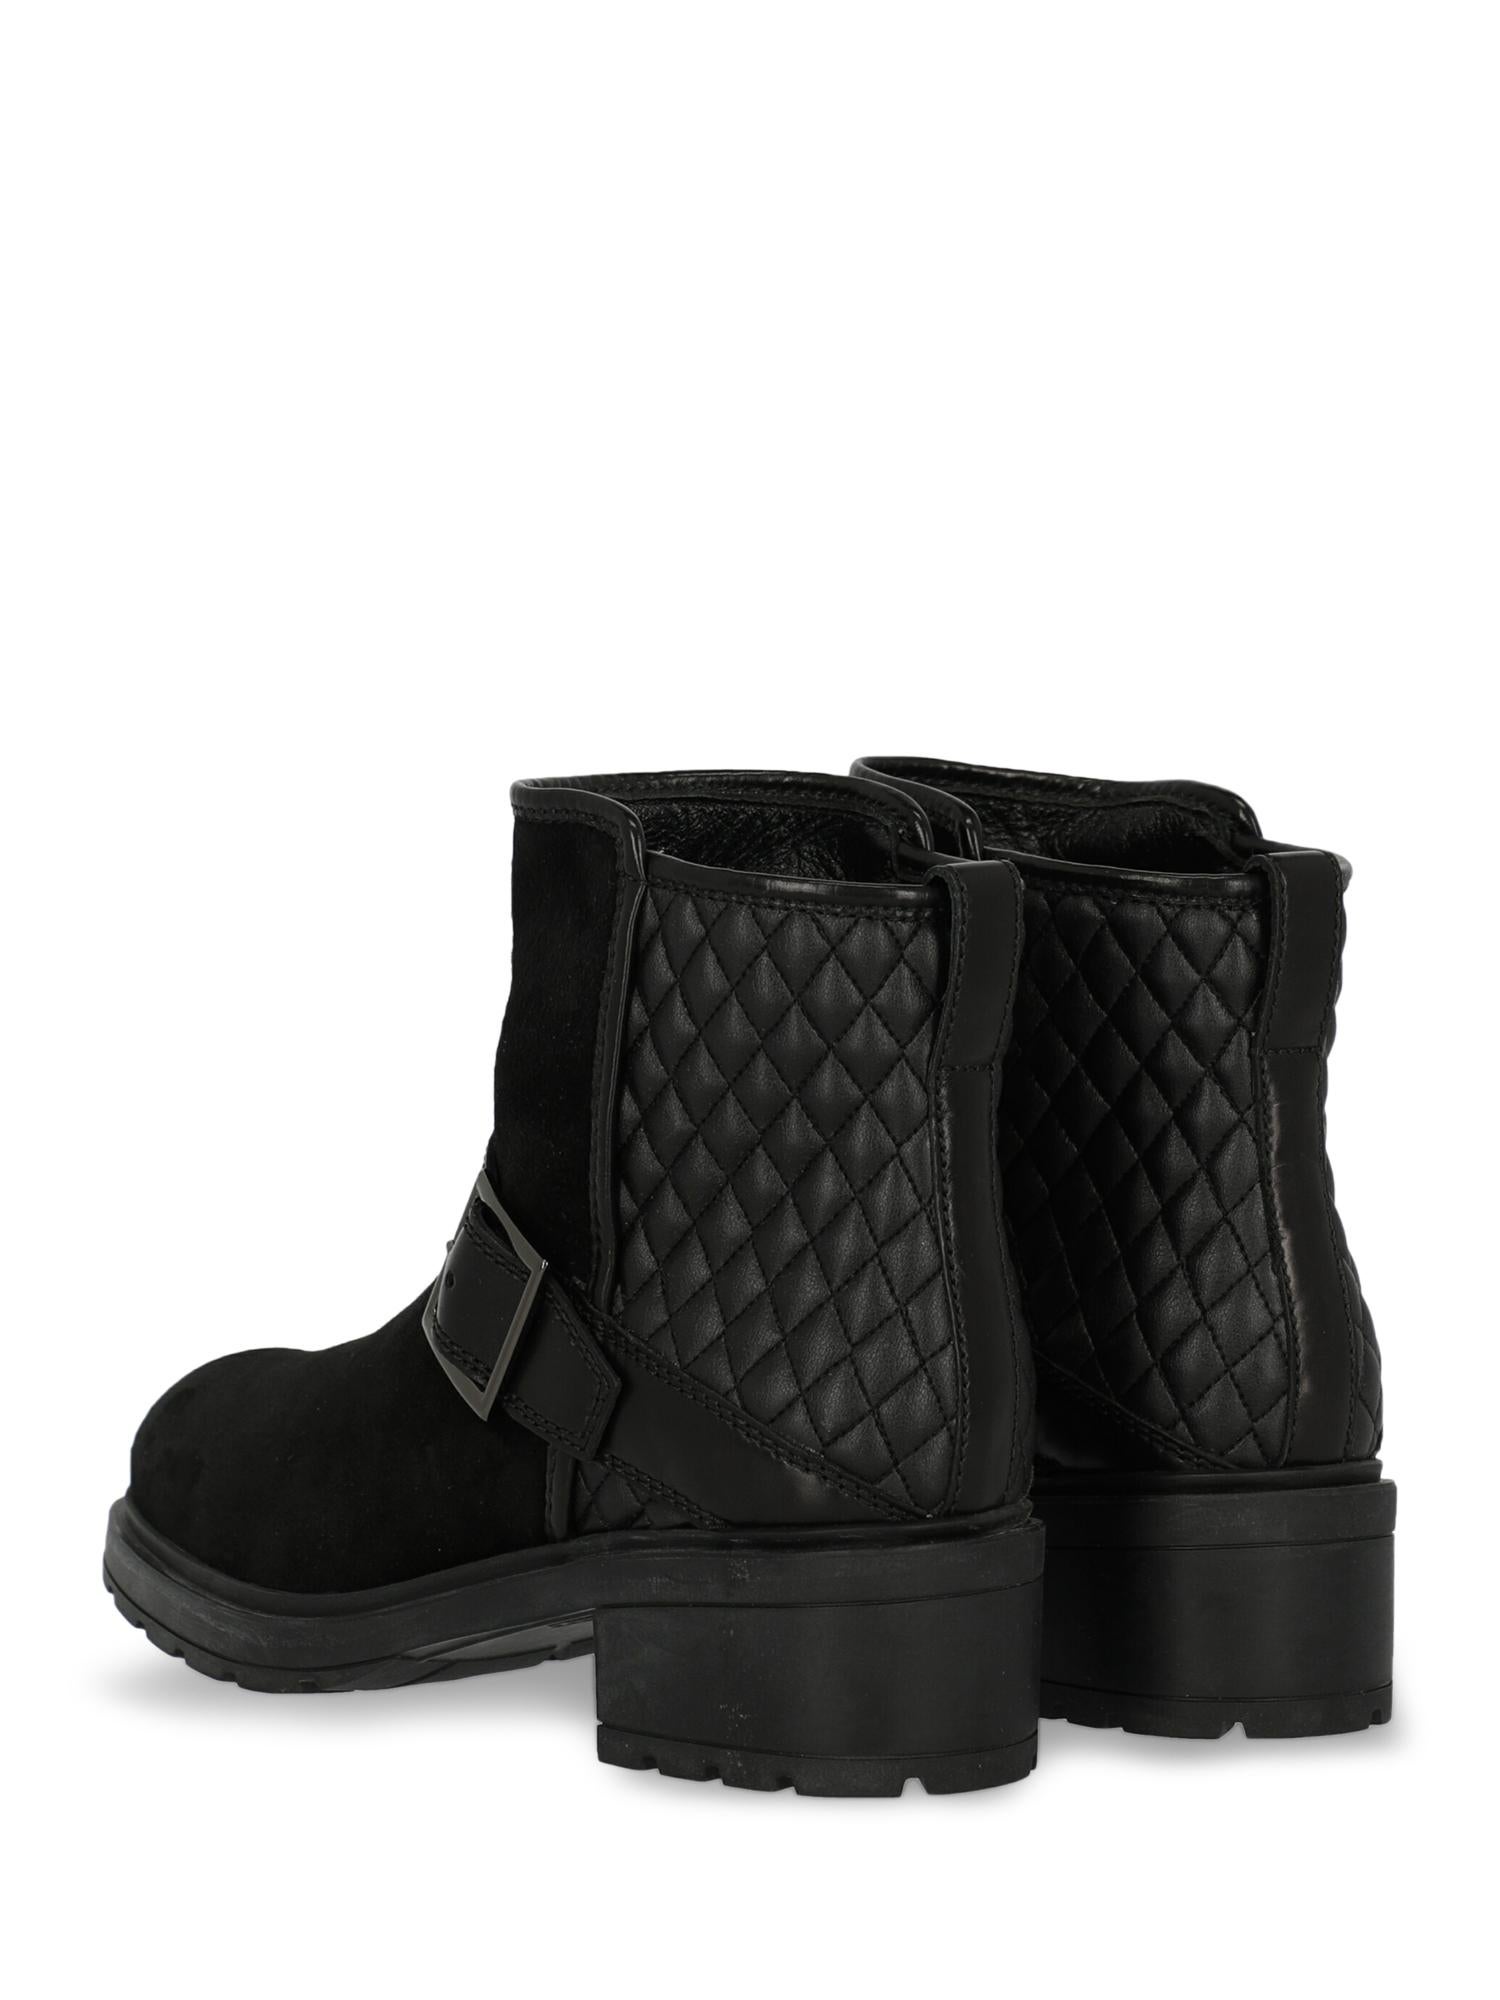 Hogan Woman Ankle boots Black EU 35.5 In Excellent Condition For Sale In Milan, IT